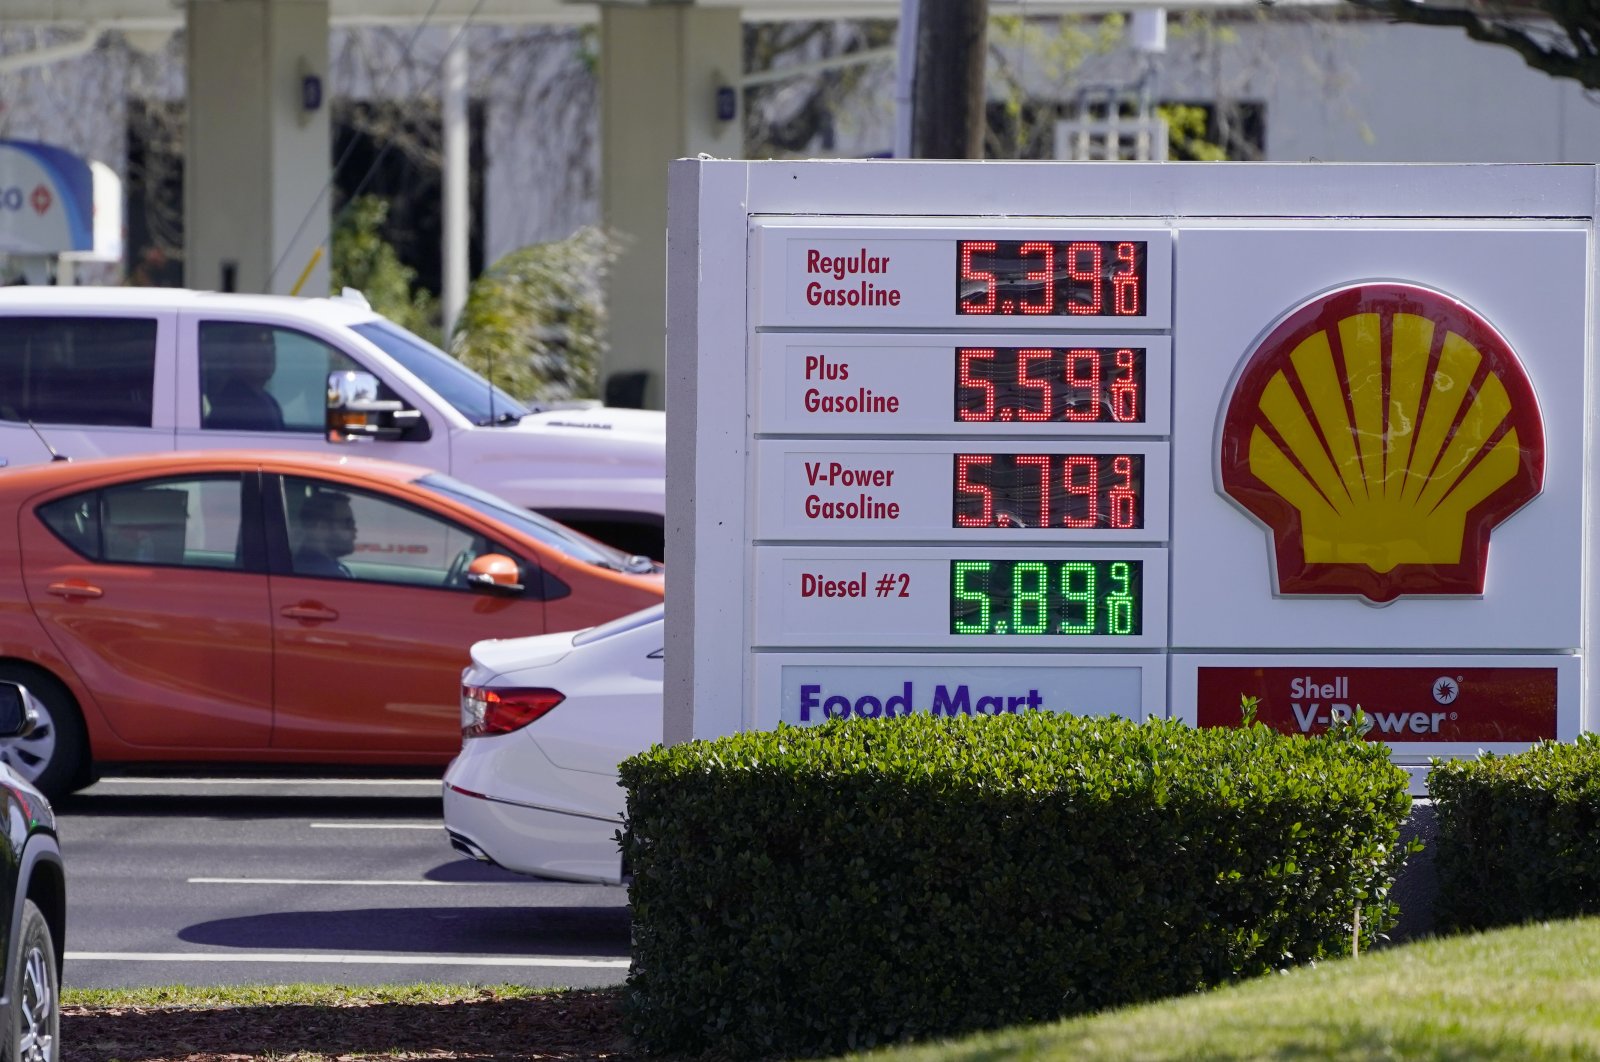 Gas prices, all over the $5 per gallon mark, are displayed at a gas station in Rancho Cordova, Calif., Monday, March 7, 2022. (AP Photo)